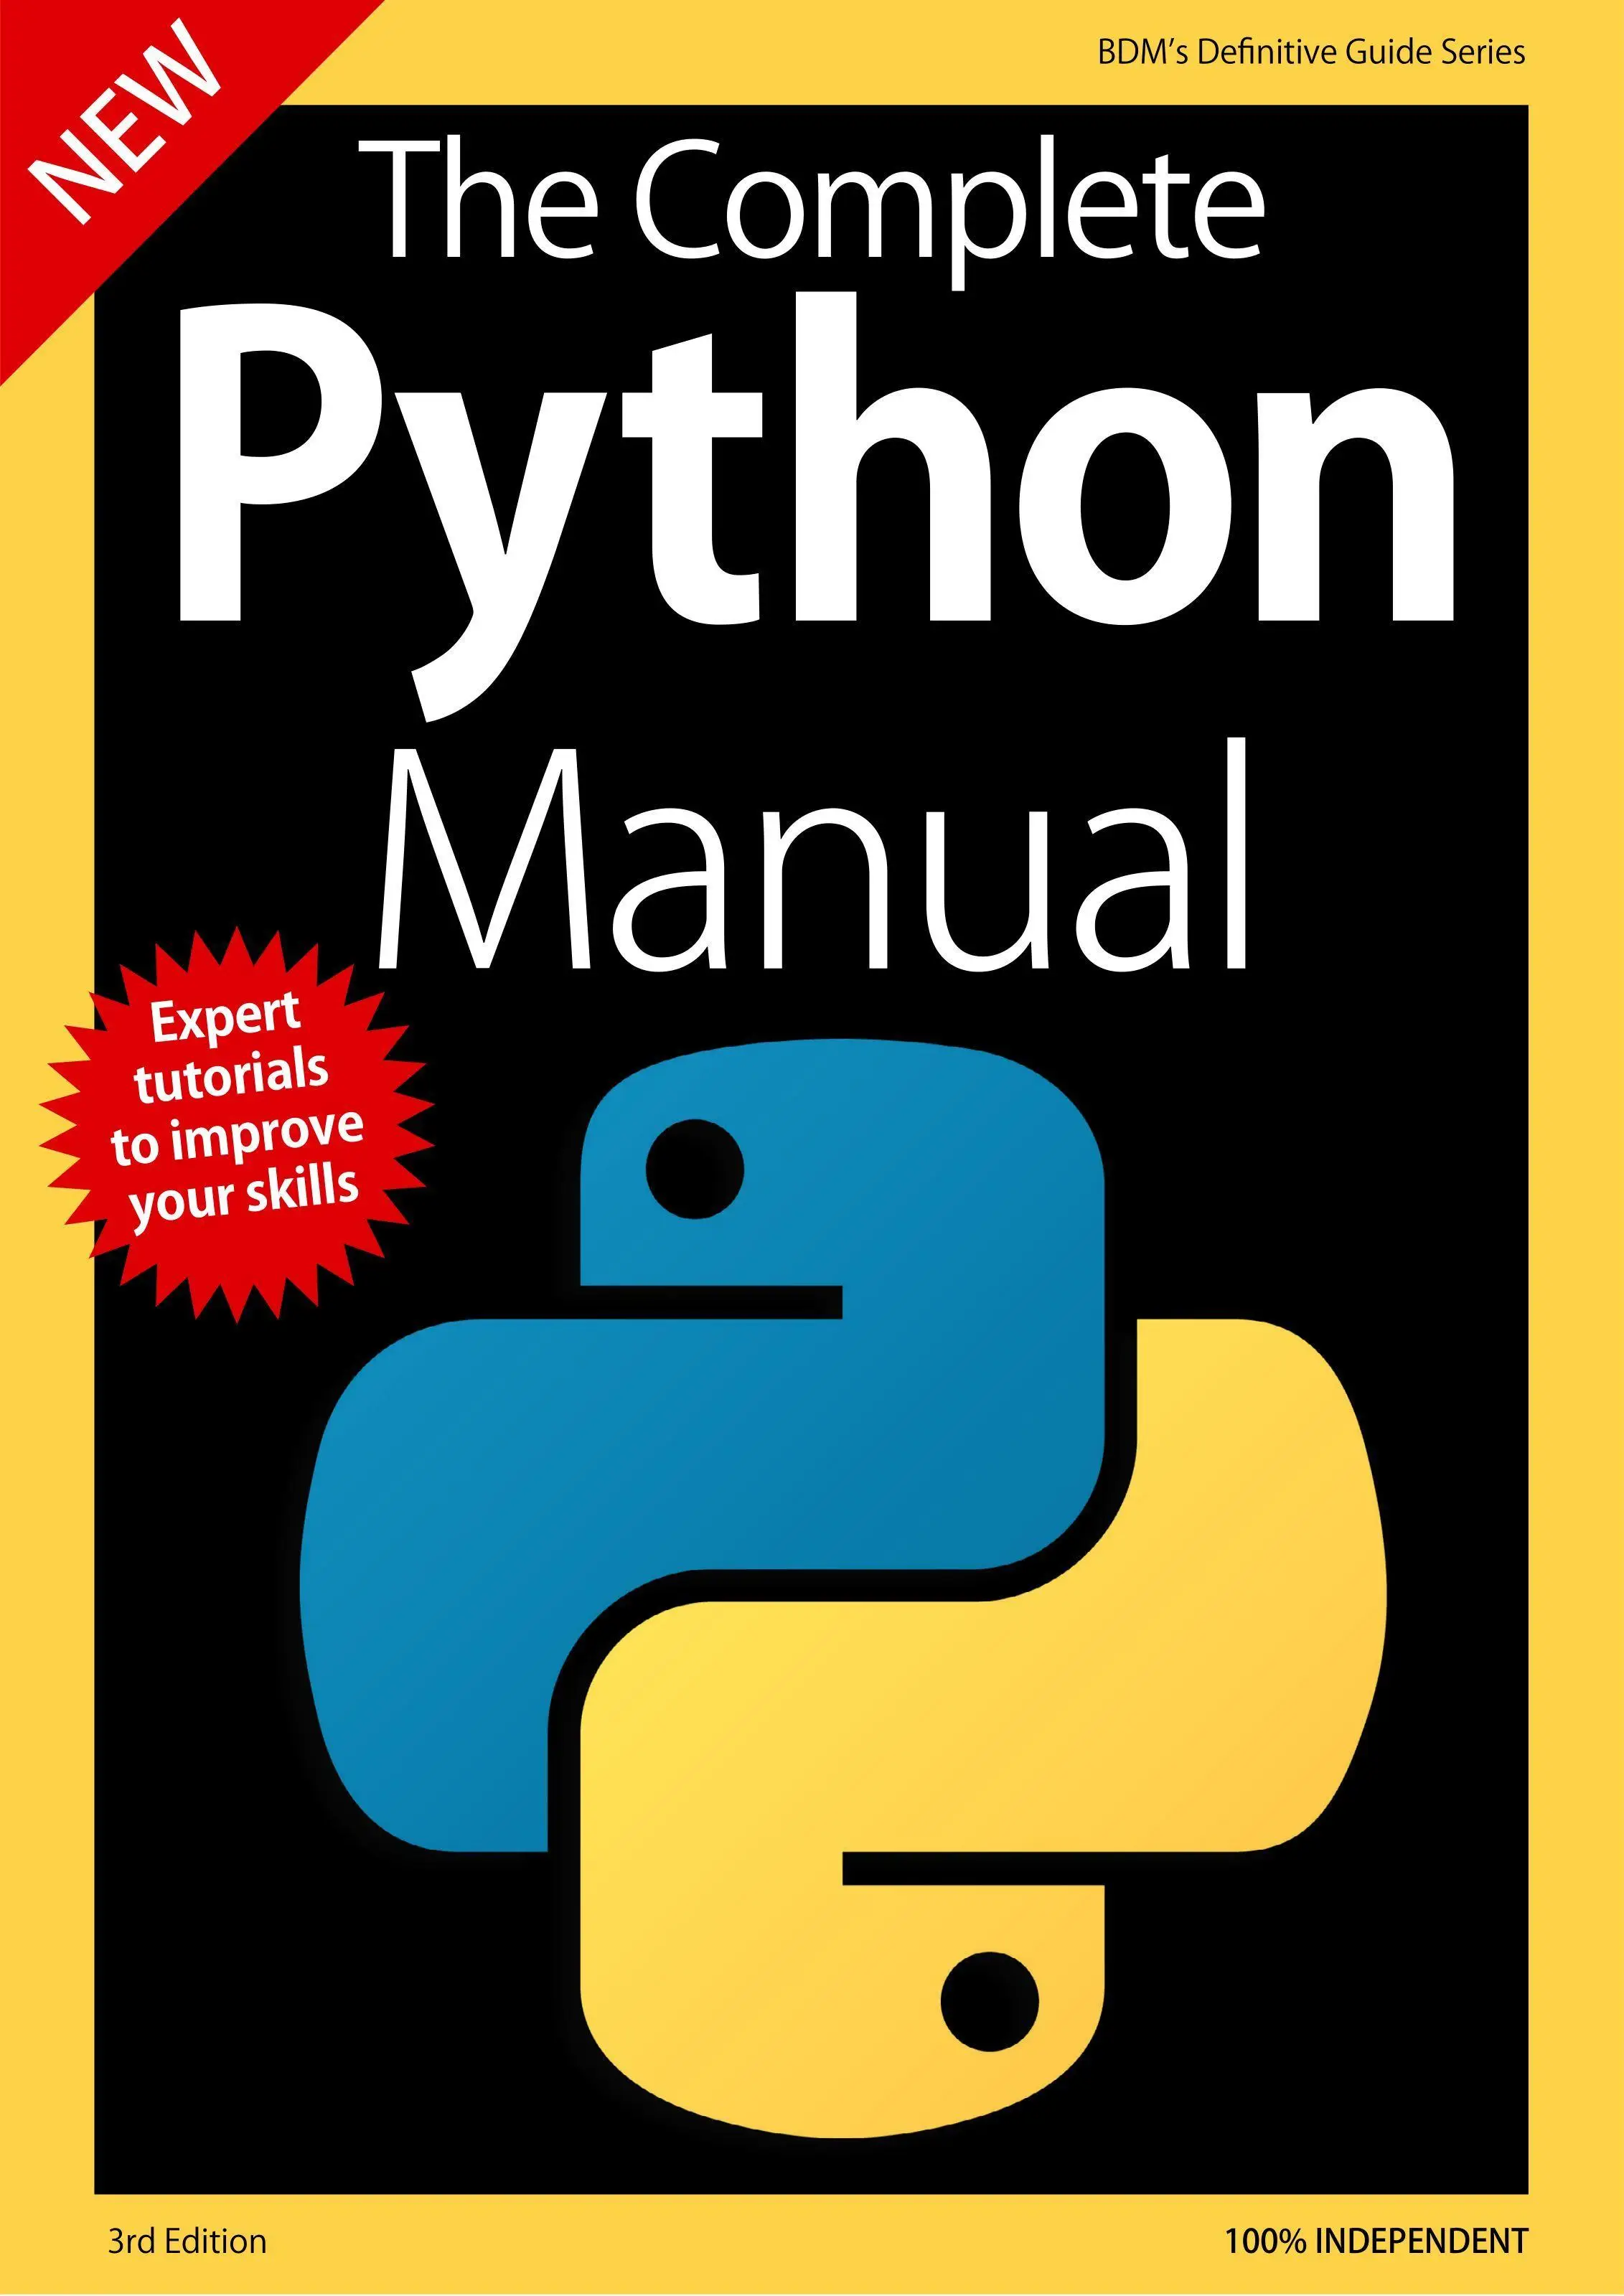 The Complete Python Manual September 2019 Avaxhome 9211